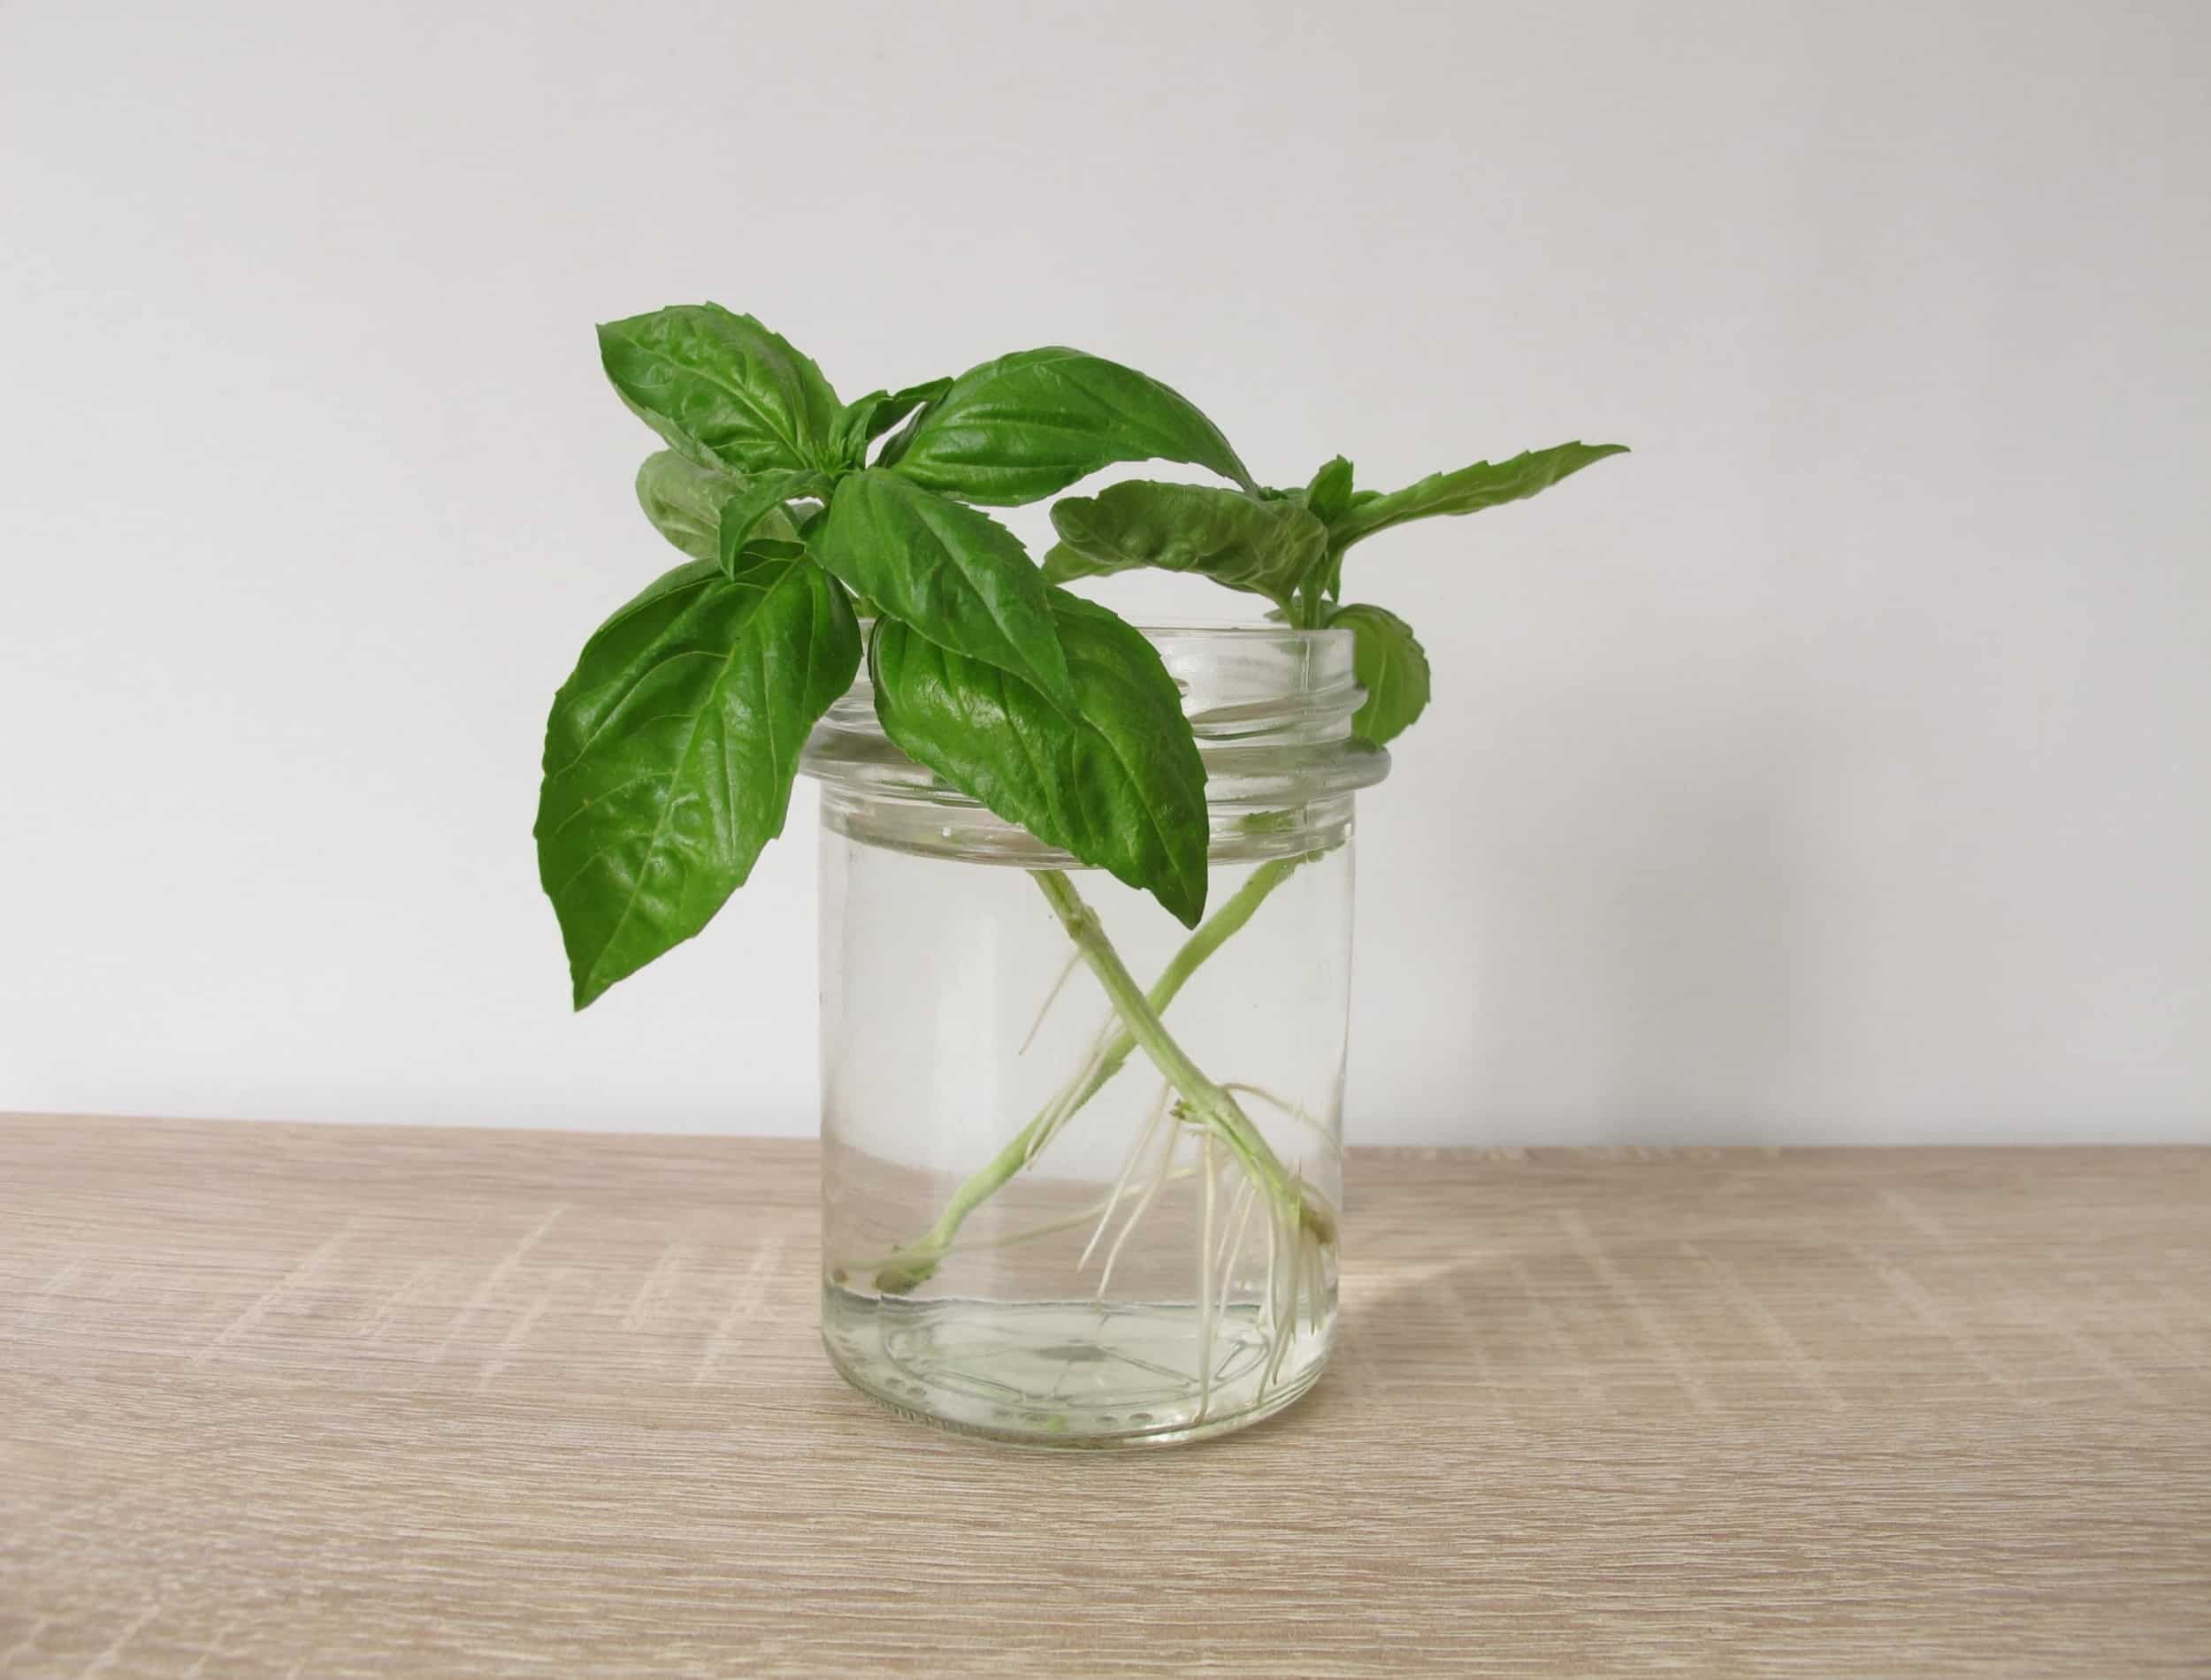 Regrow basil in a glass of water